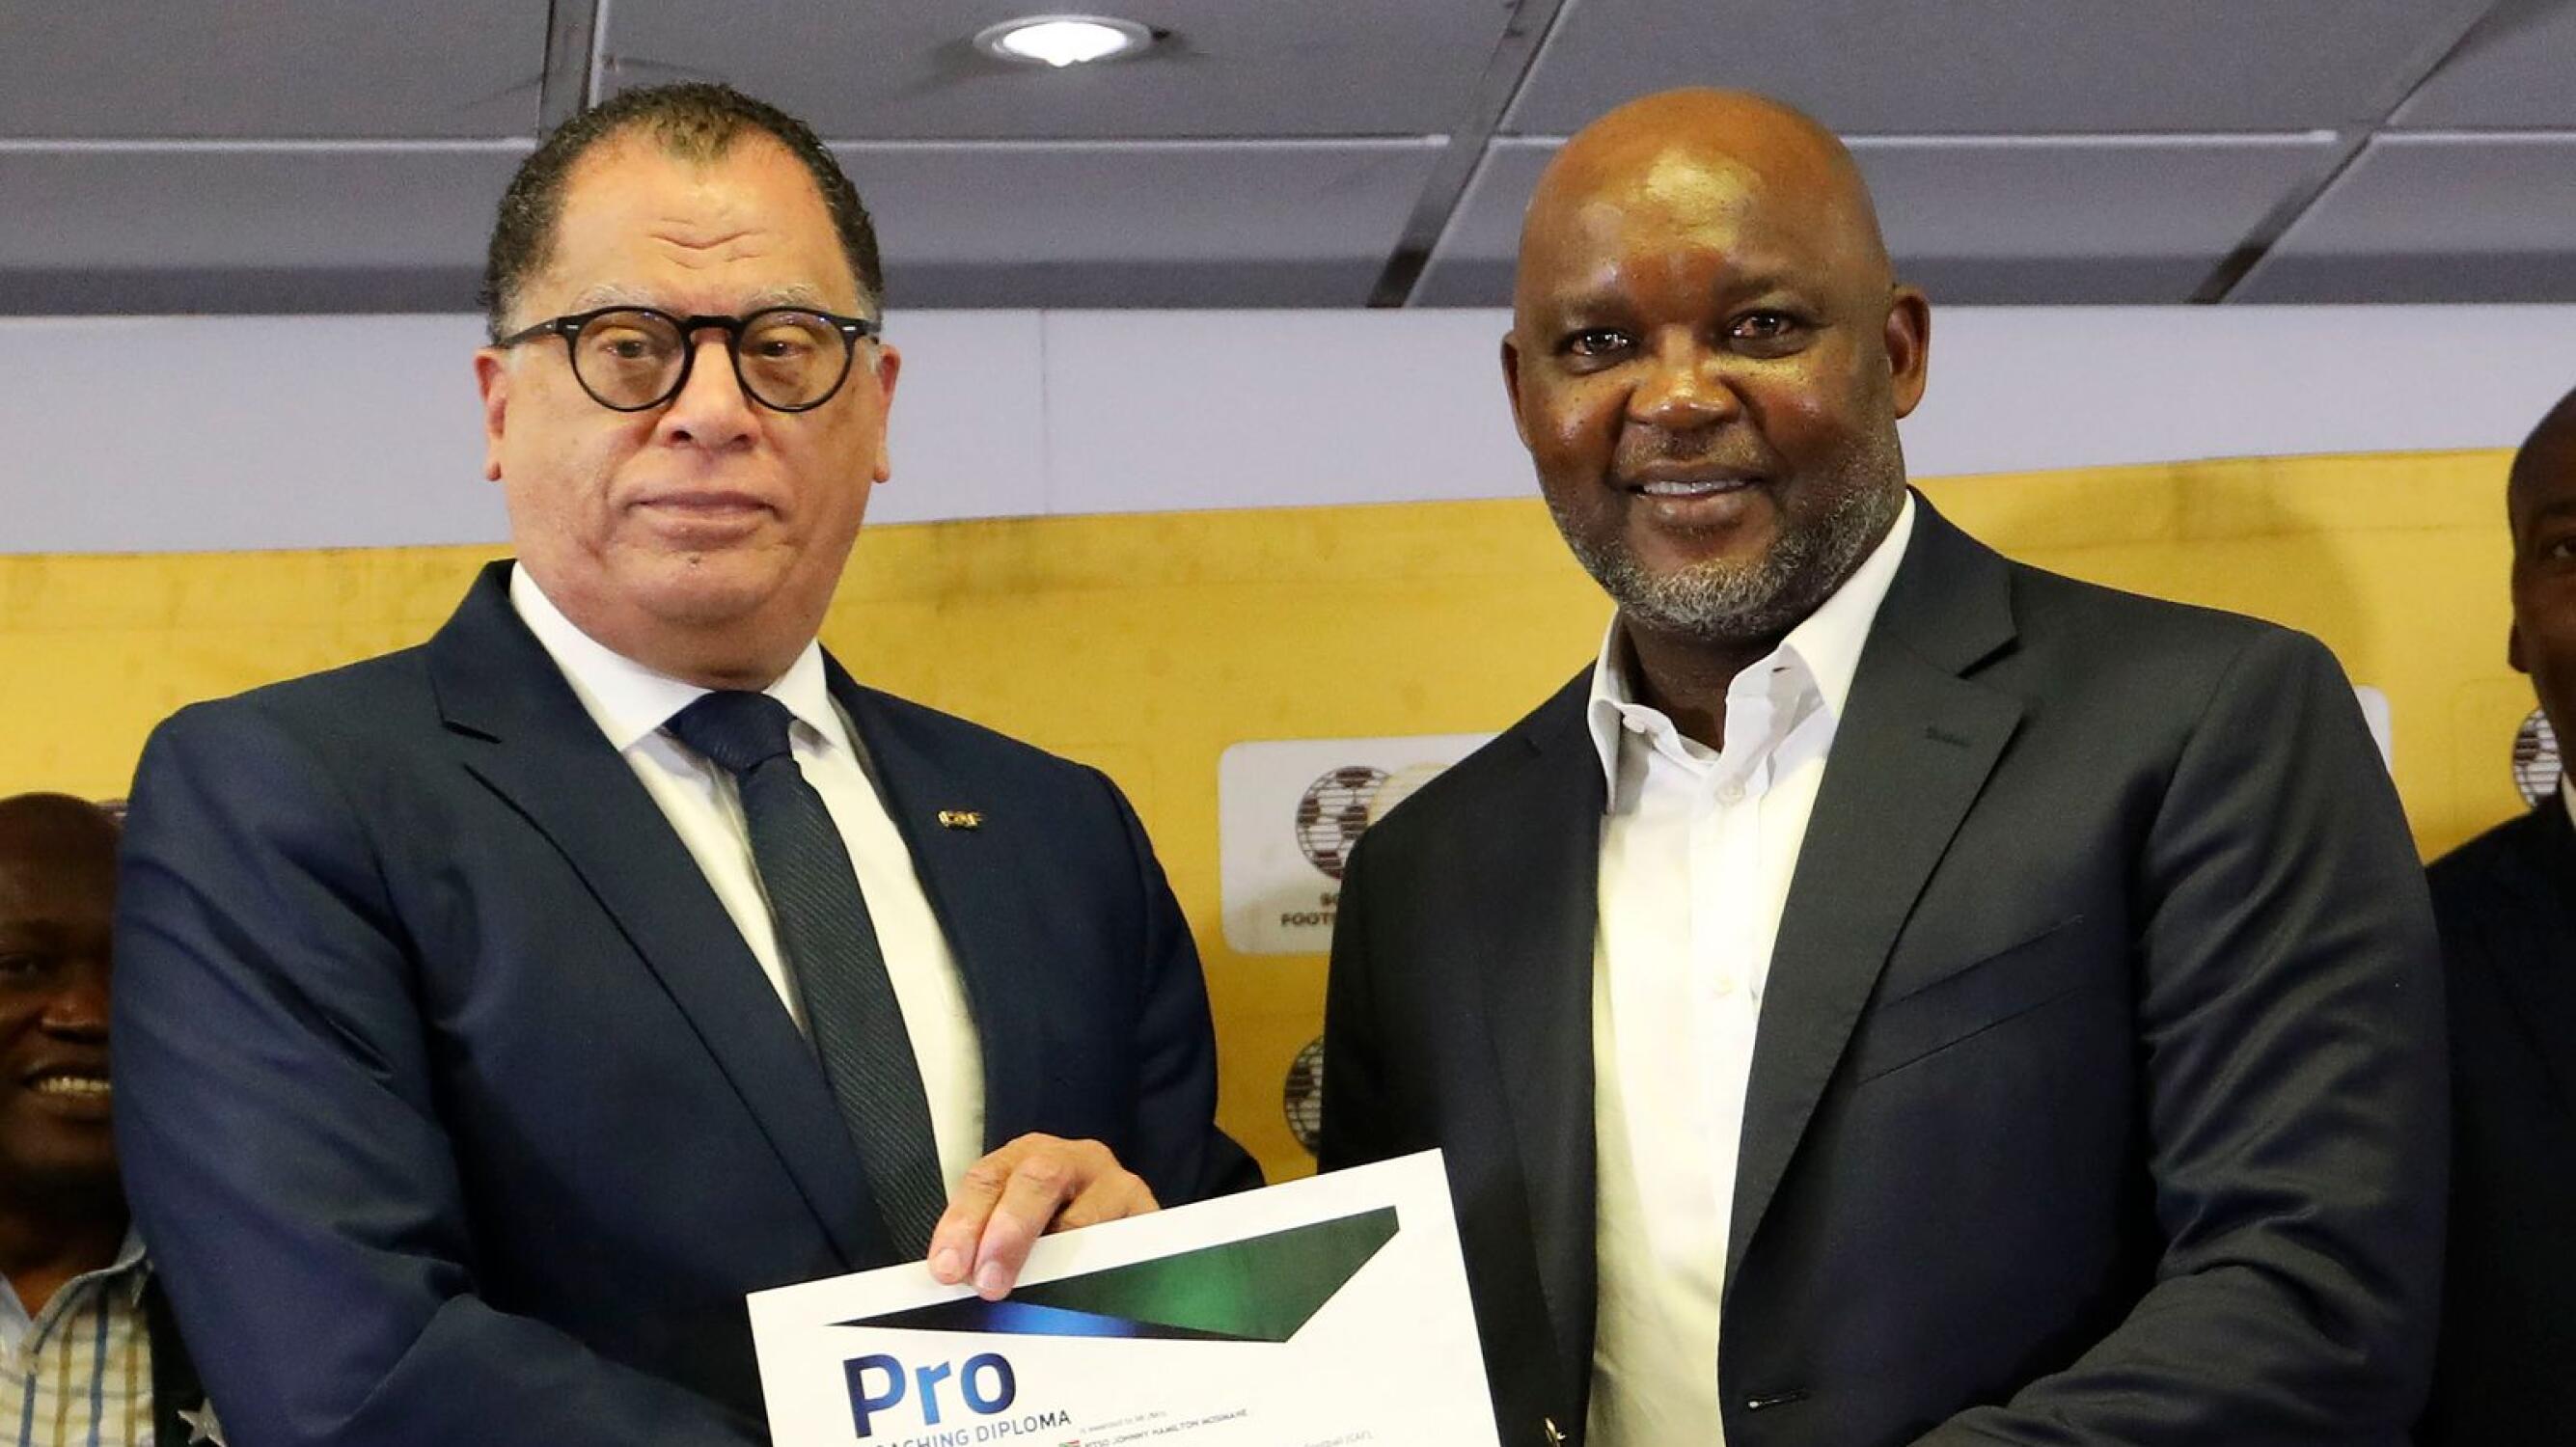 Pitso Mosimane receives a coaching CAF PRO licence from Safa president Danny Jordaan at the SAFA House in Johannesburg on Thursday